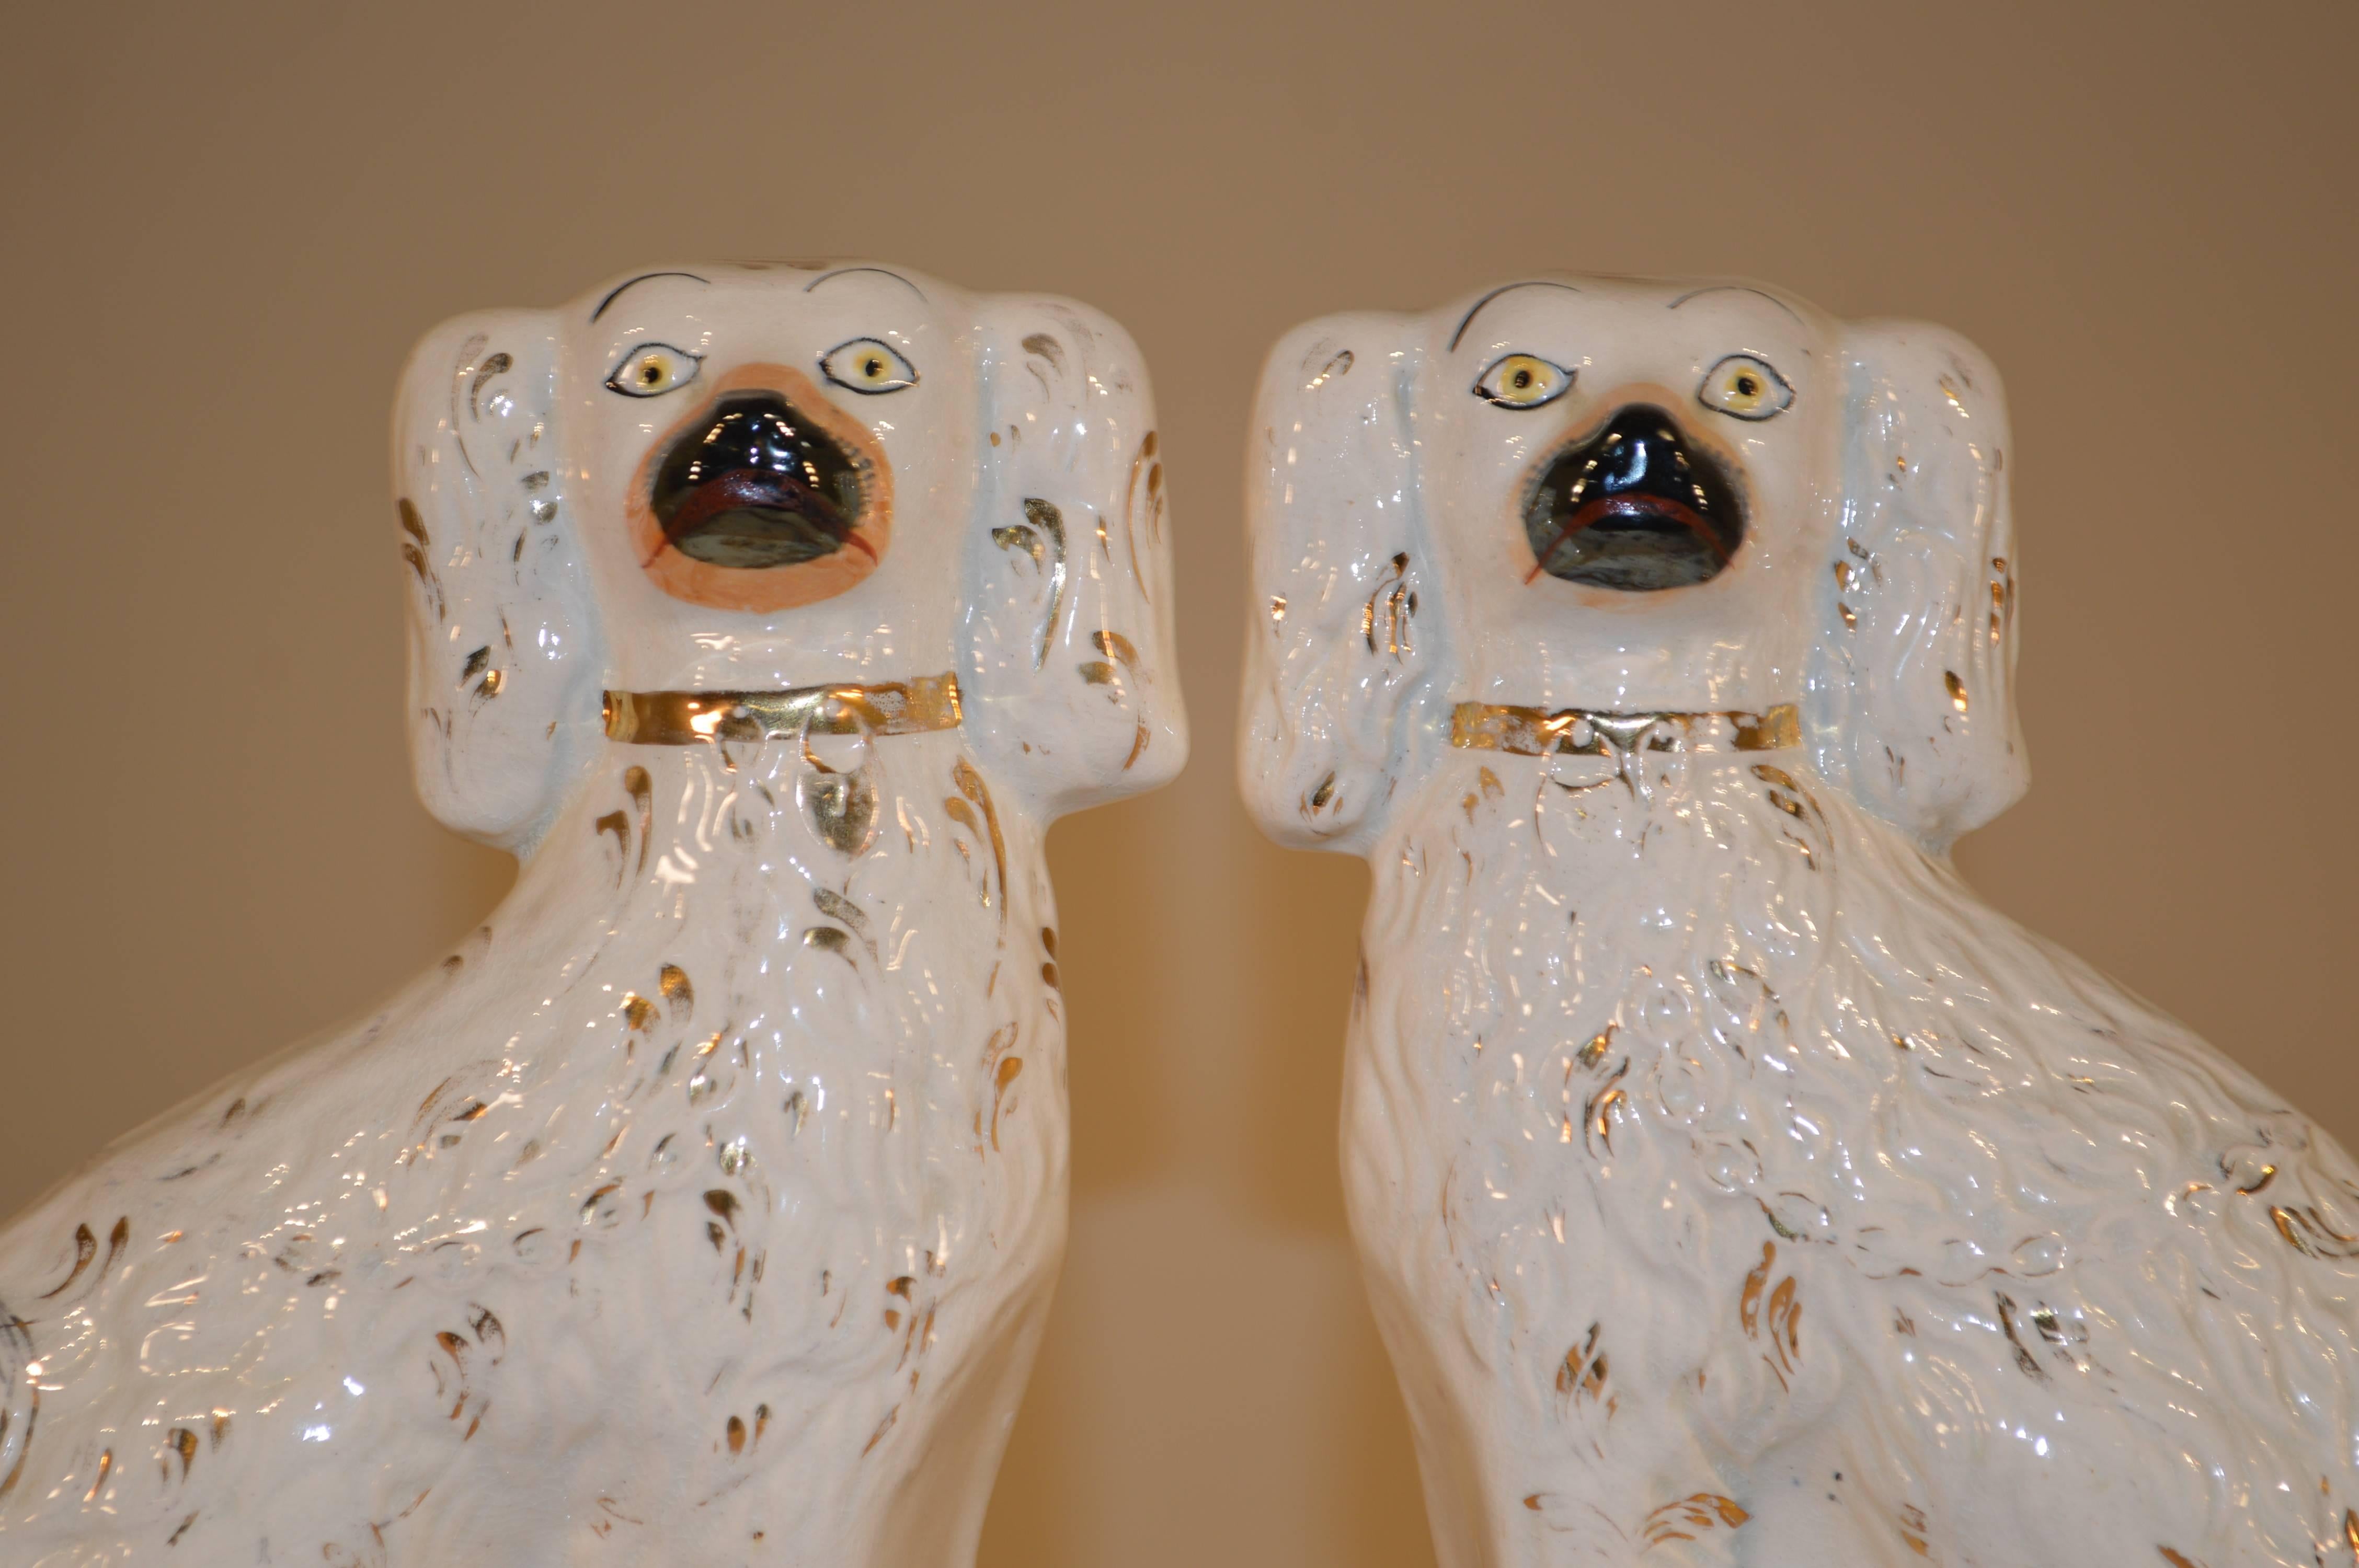 Pair of 19th century English Staffordshire dogs with curly tails with gold accents.